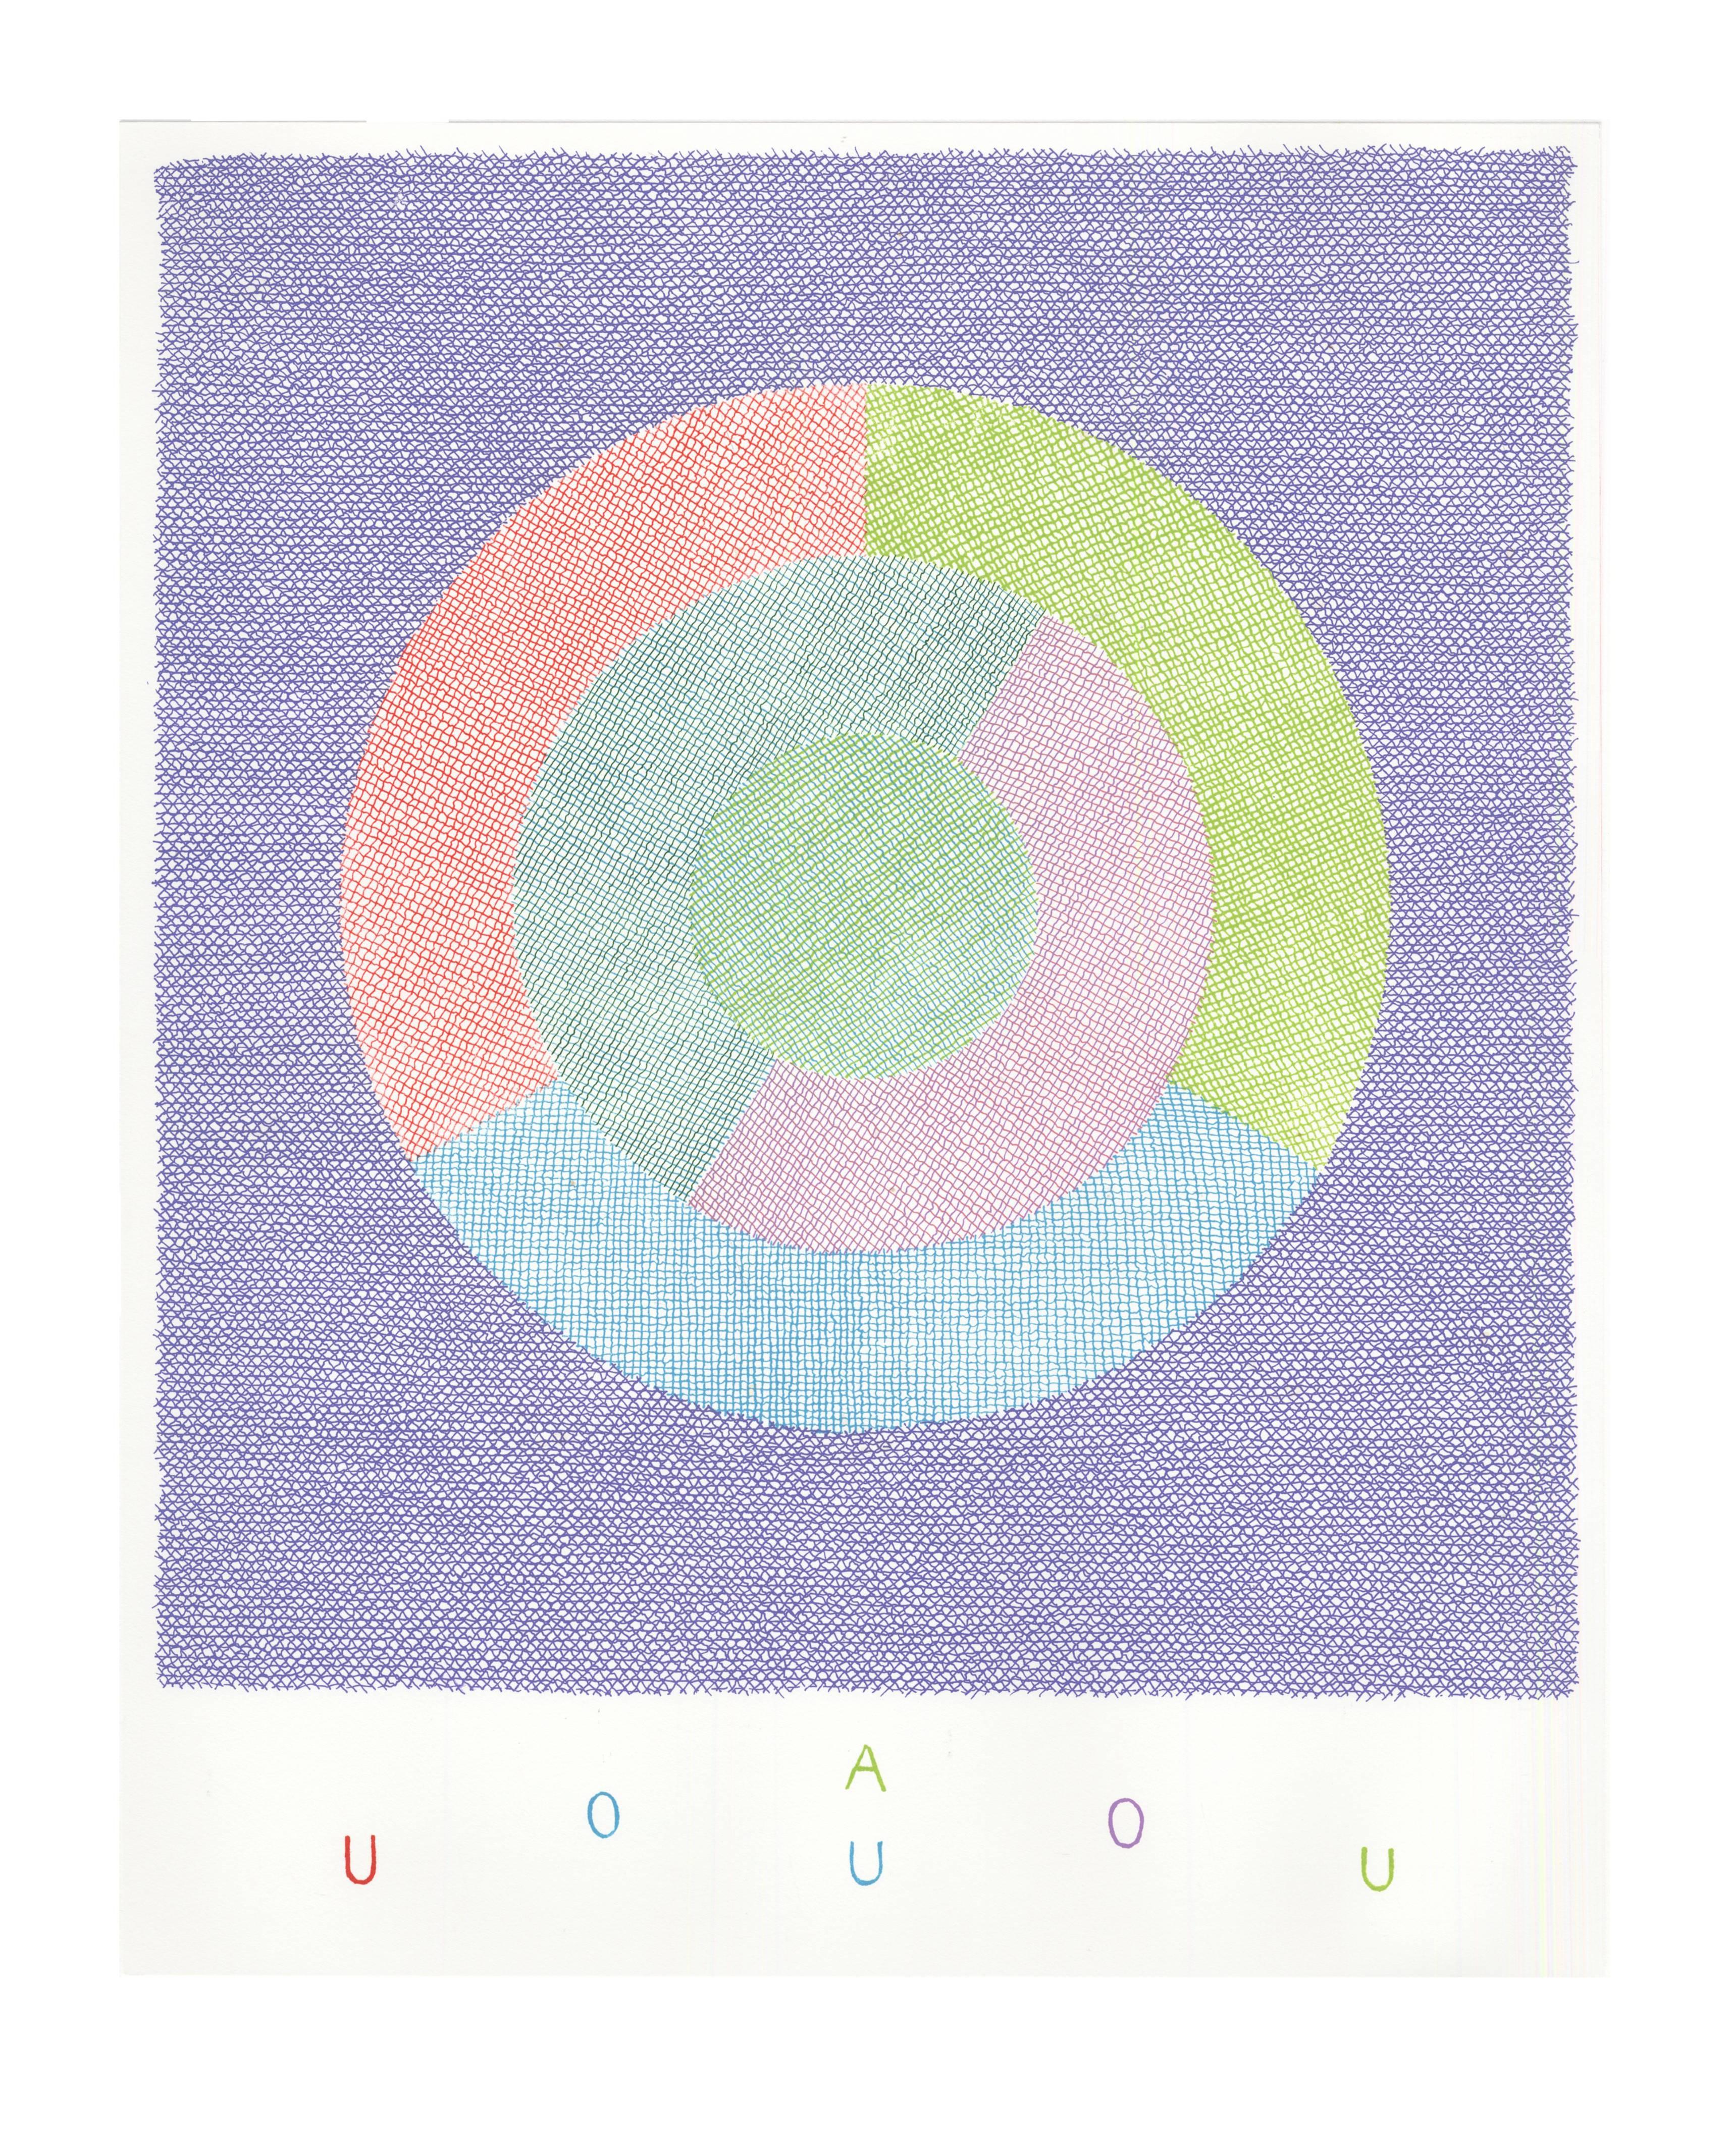 Brian O'Doherty Abstract Print - Rotating Vowels iii